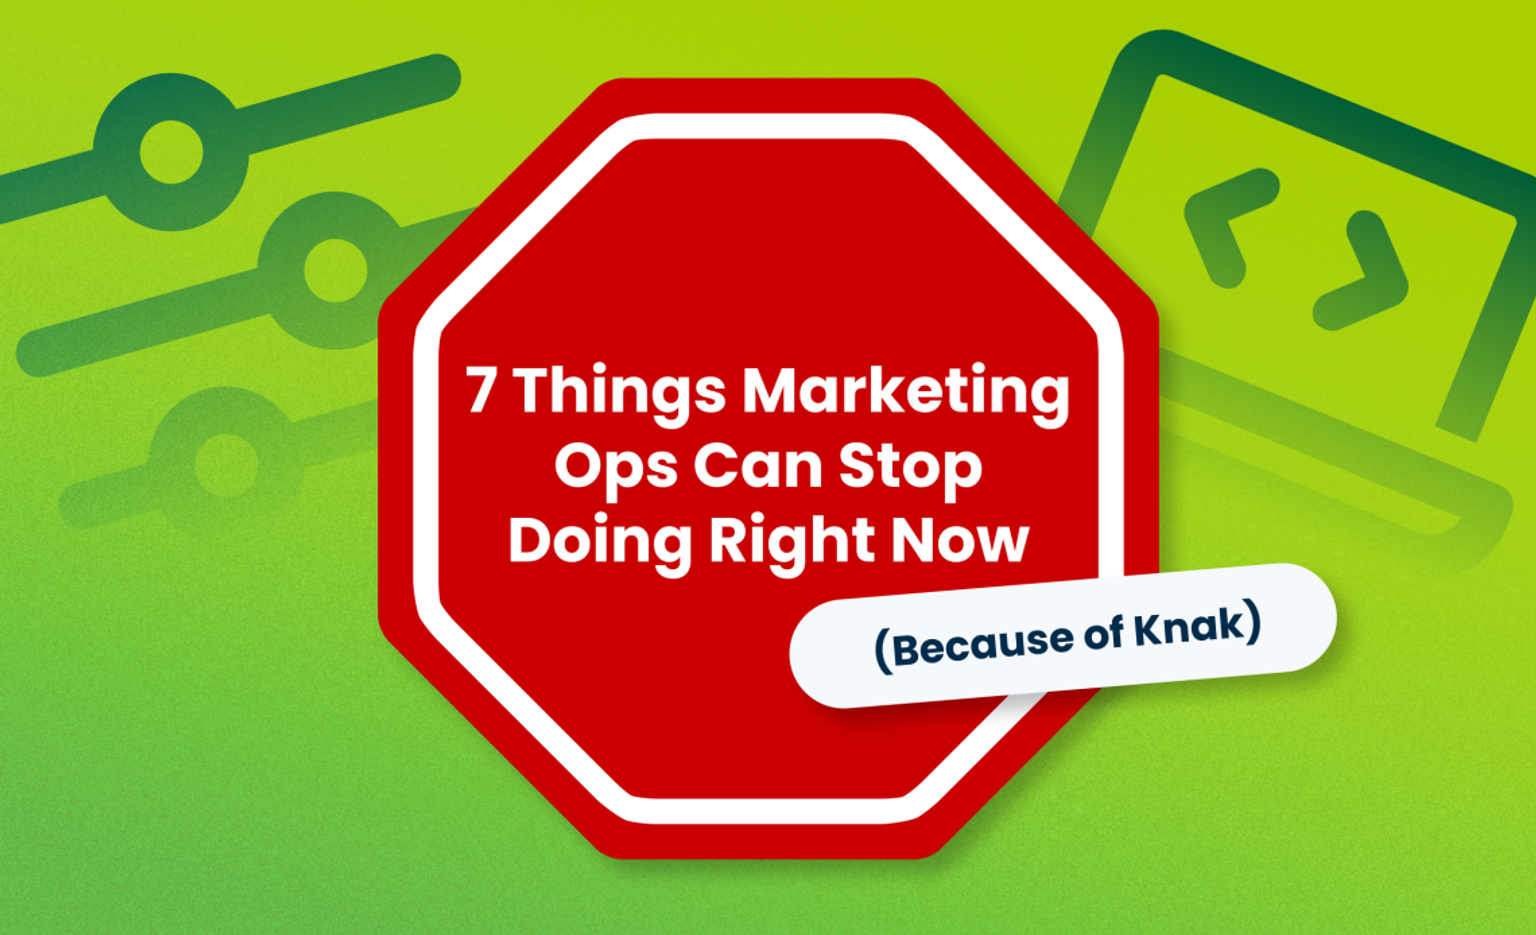 7 Things Marketing Ops Can Stop Doing Right Now (Because of Knak)